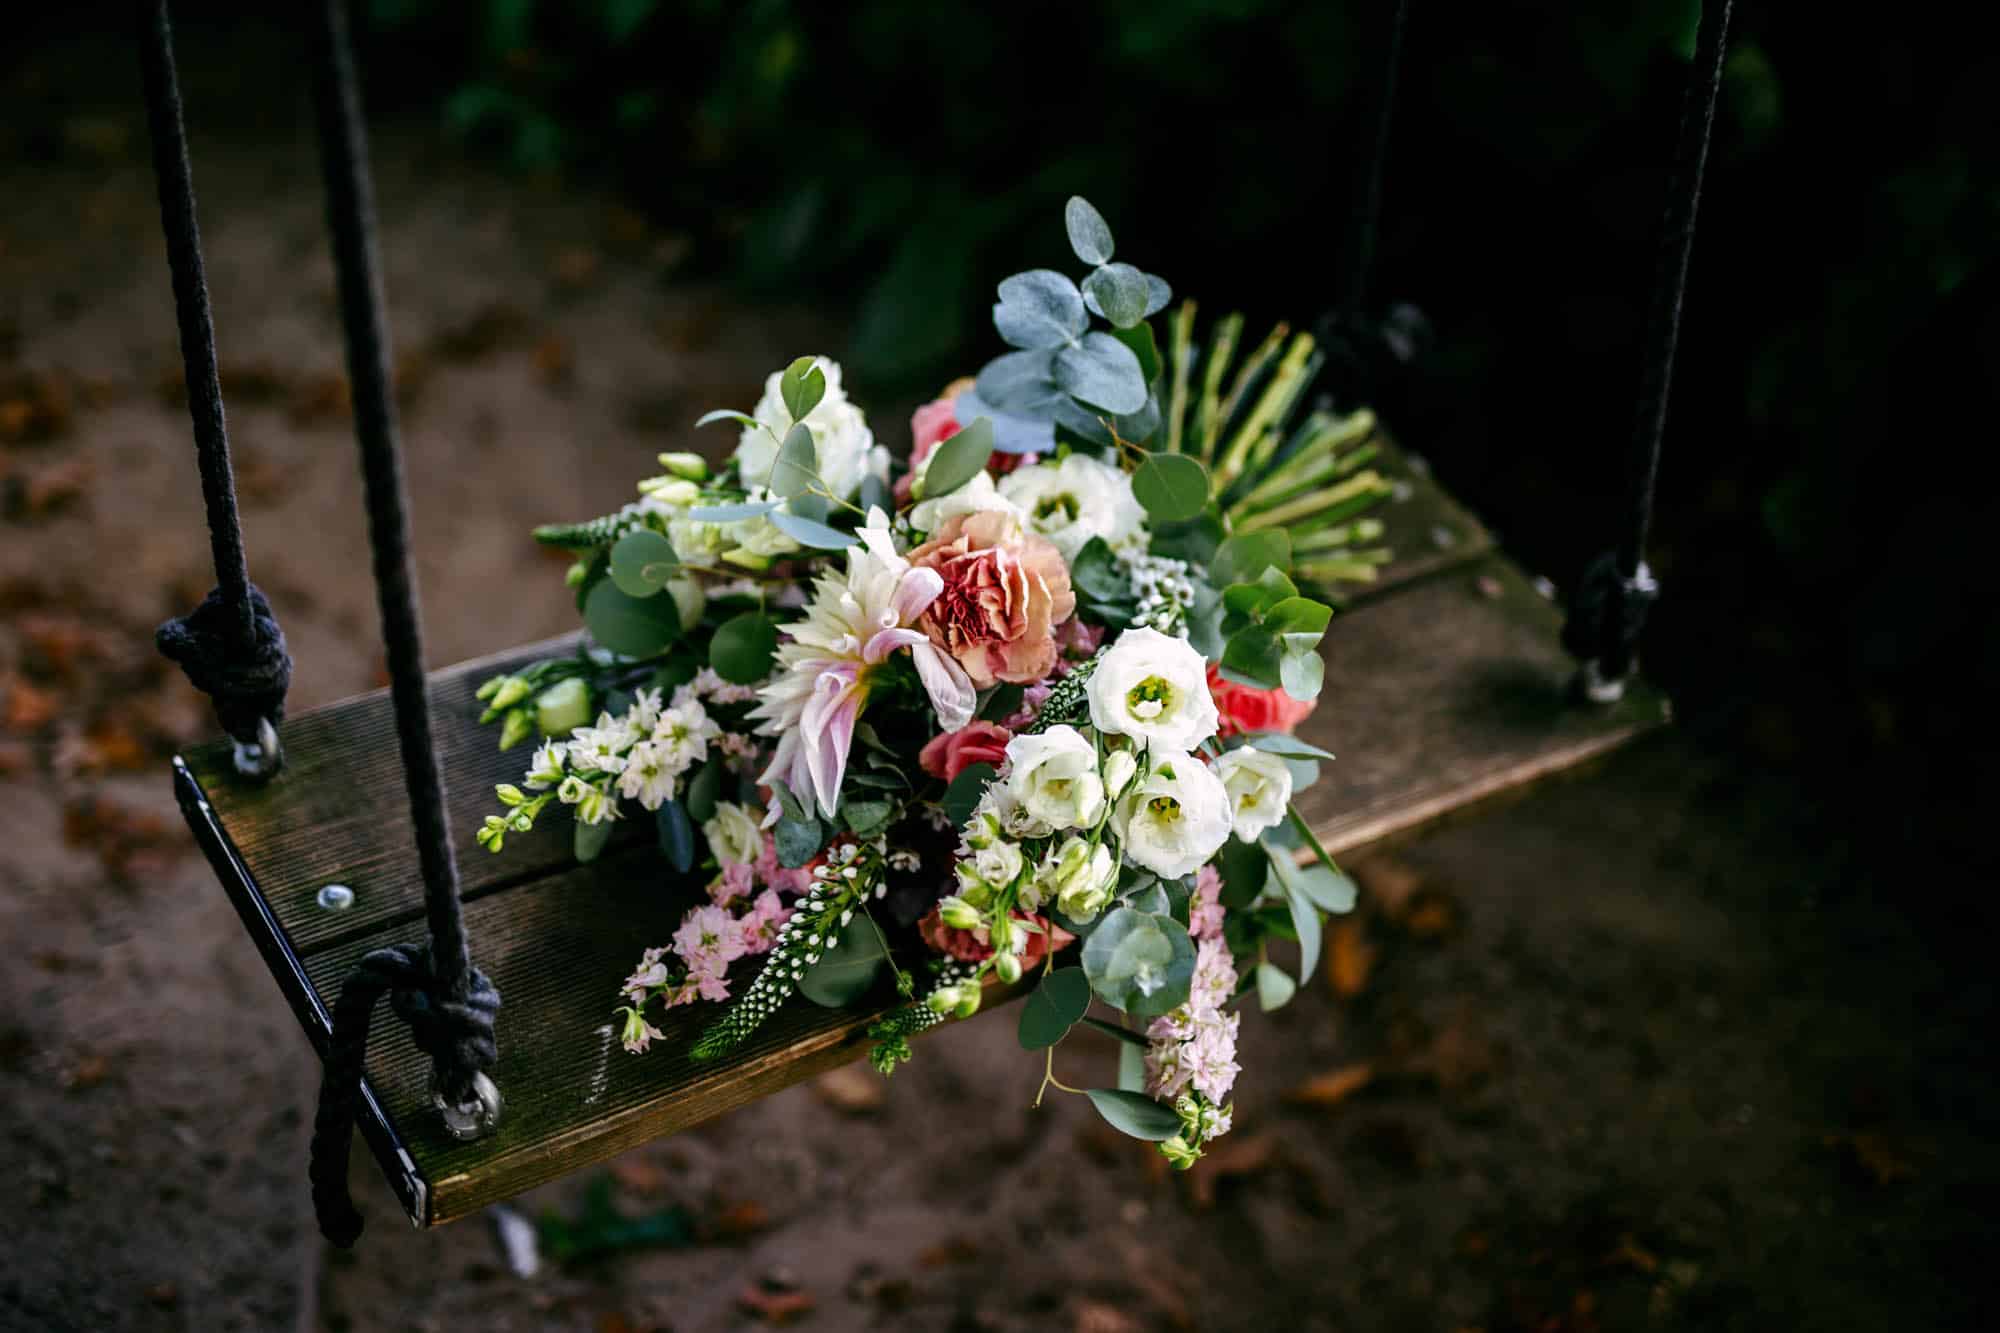 A wedding bouquet stands on a wooden swing.